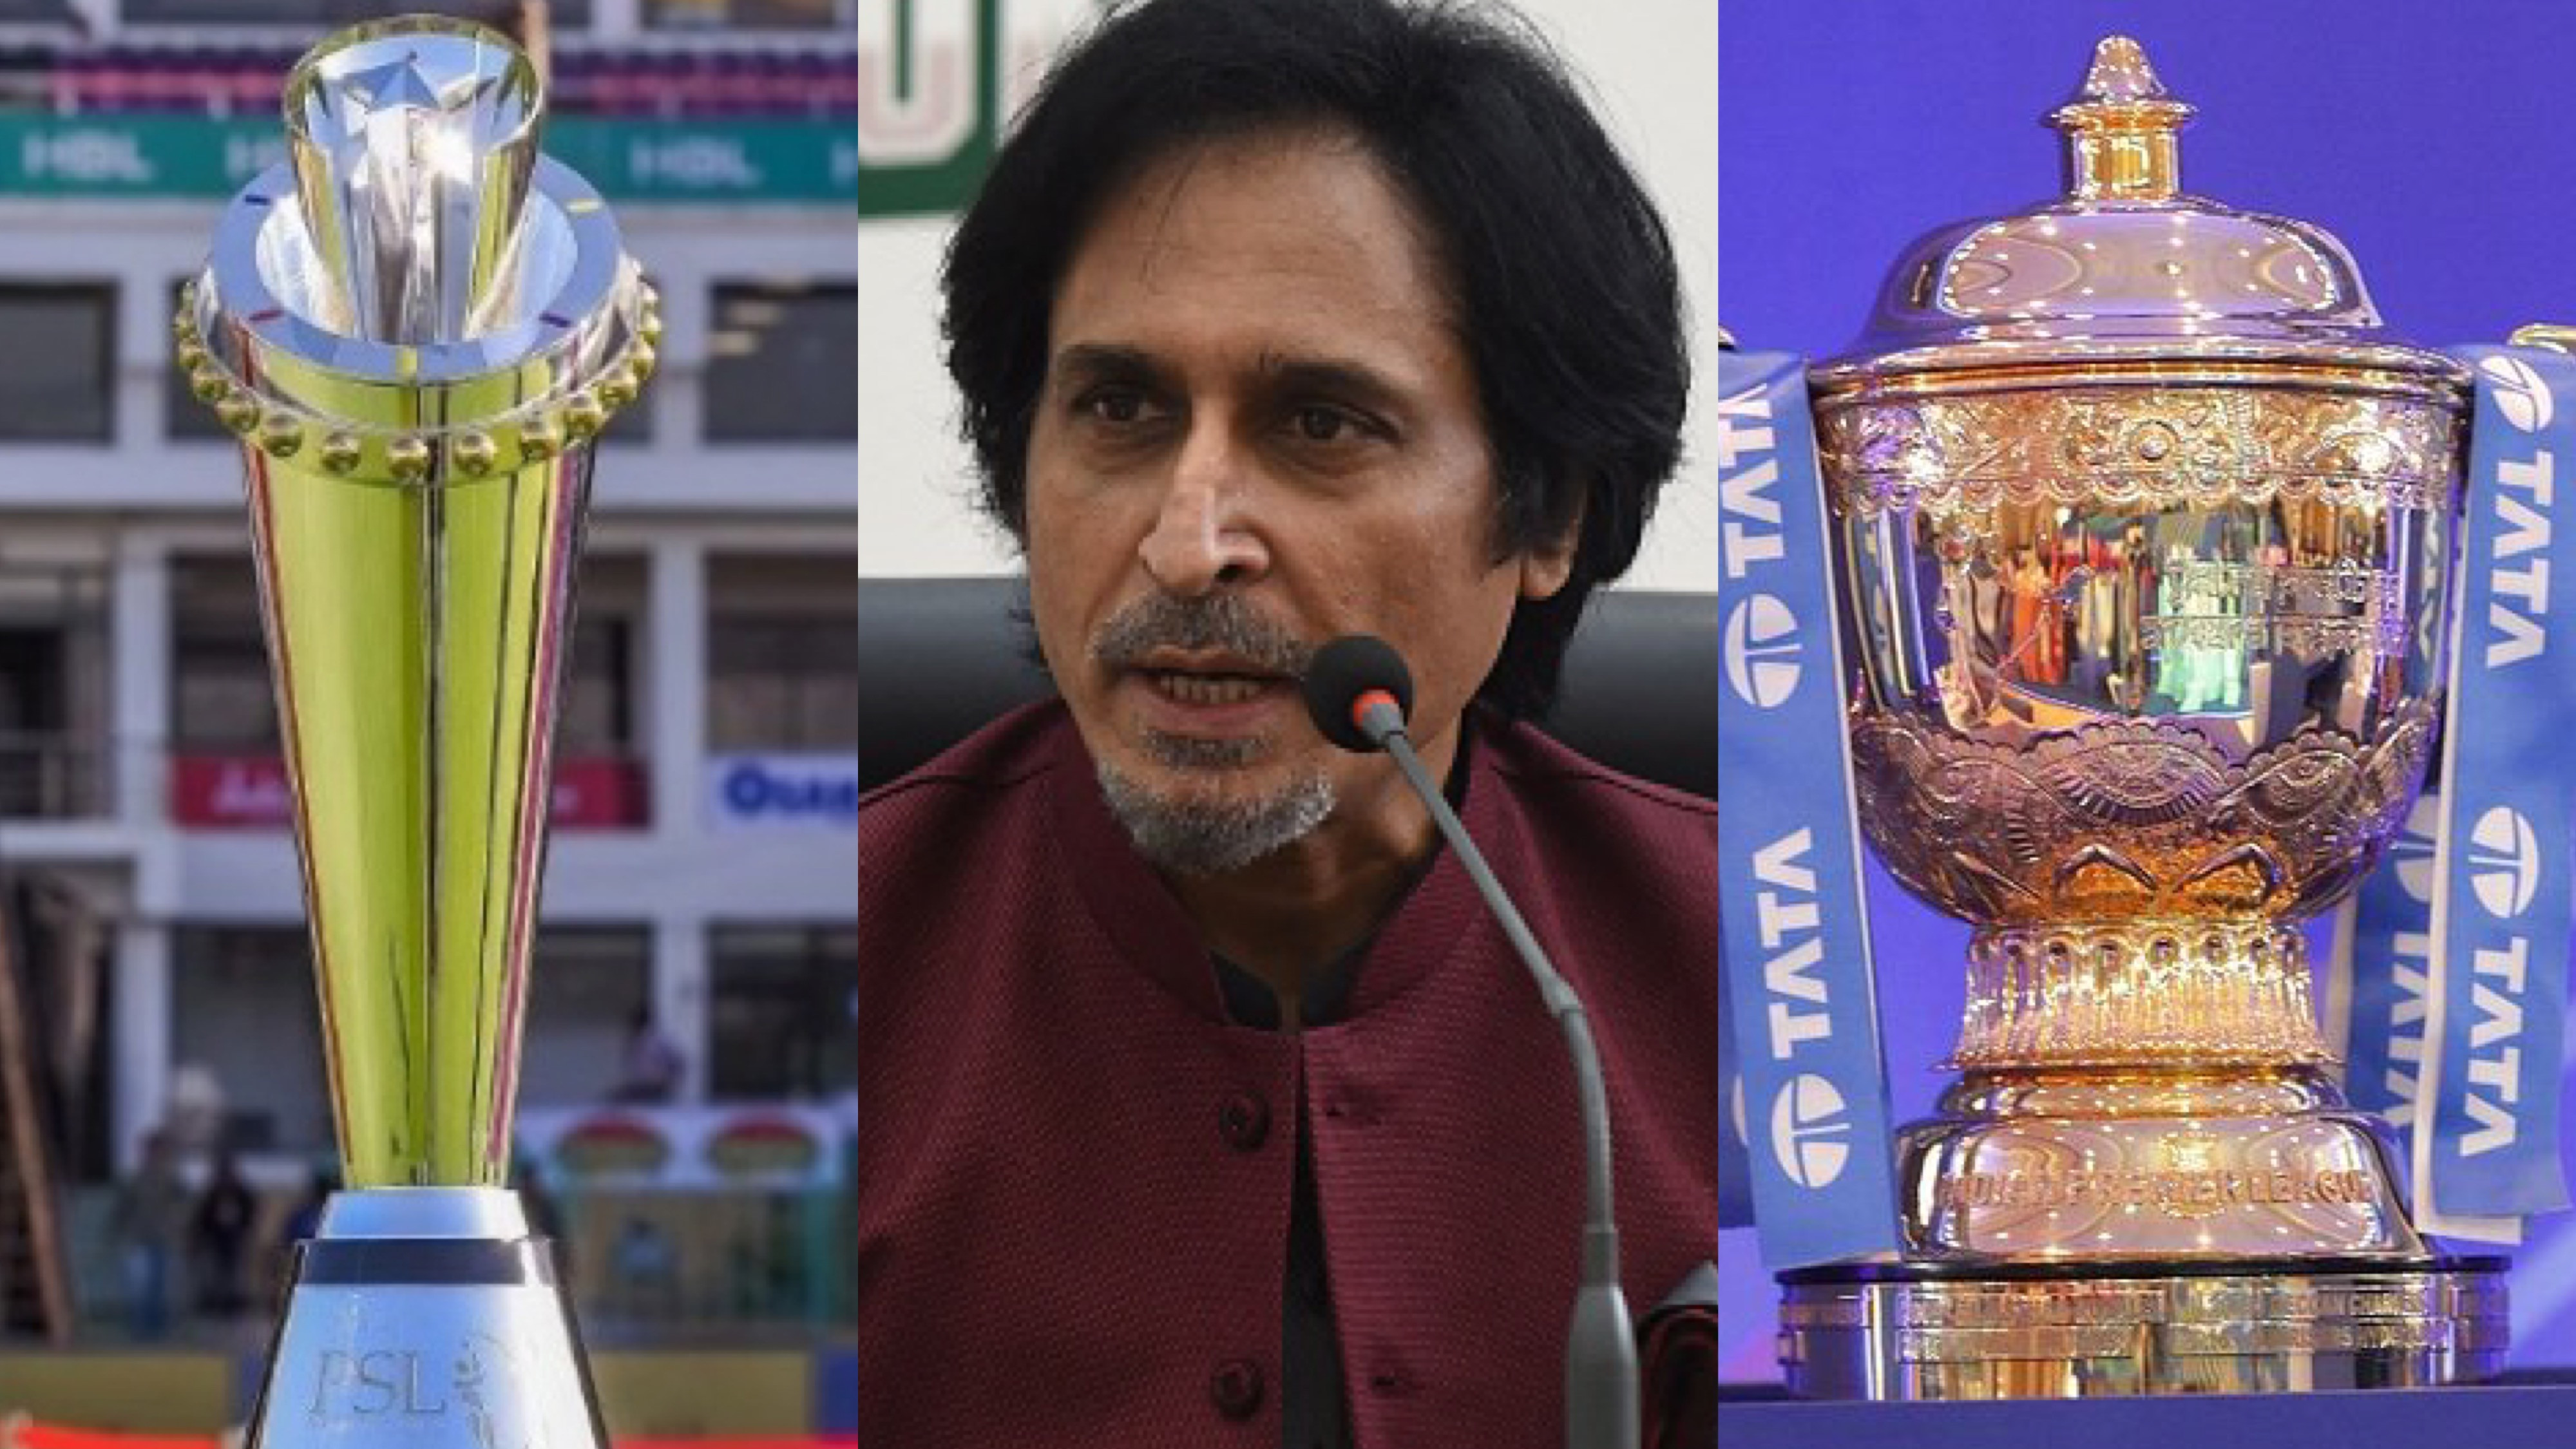 “I'll put PSL in IPL bracket, then we'll see who goes to play the IPL” - Ramiz Raja wants PSL to adopt auction model